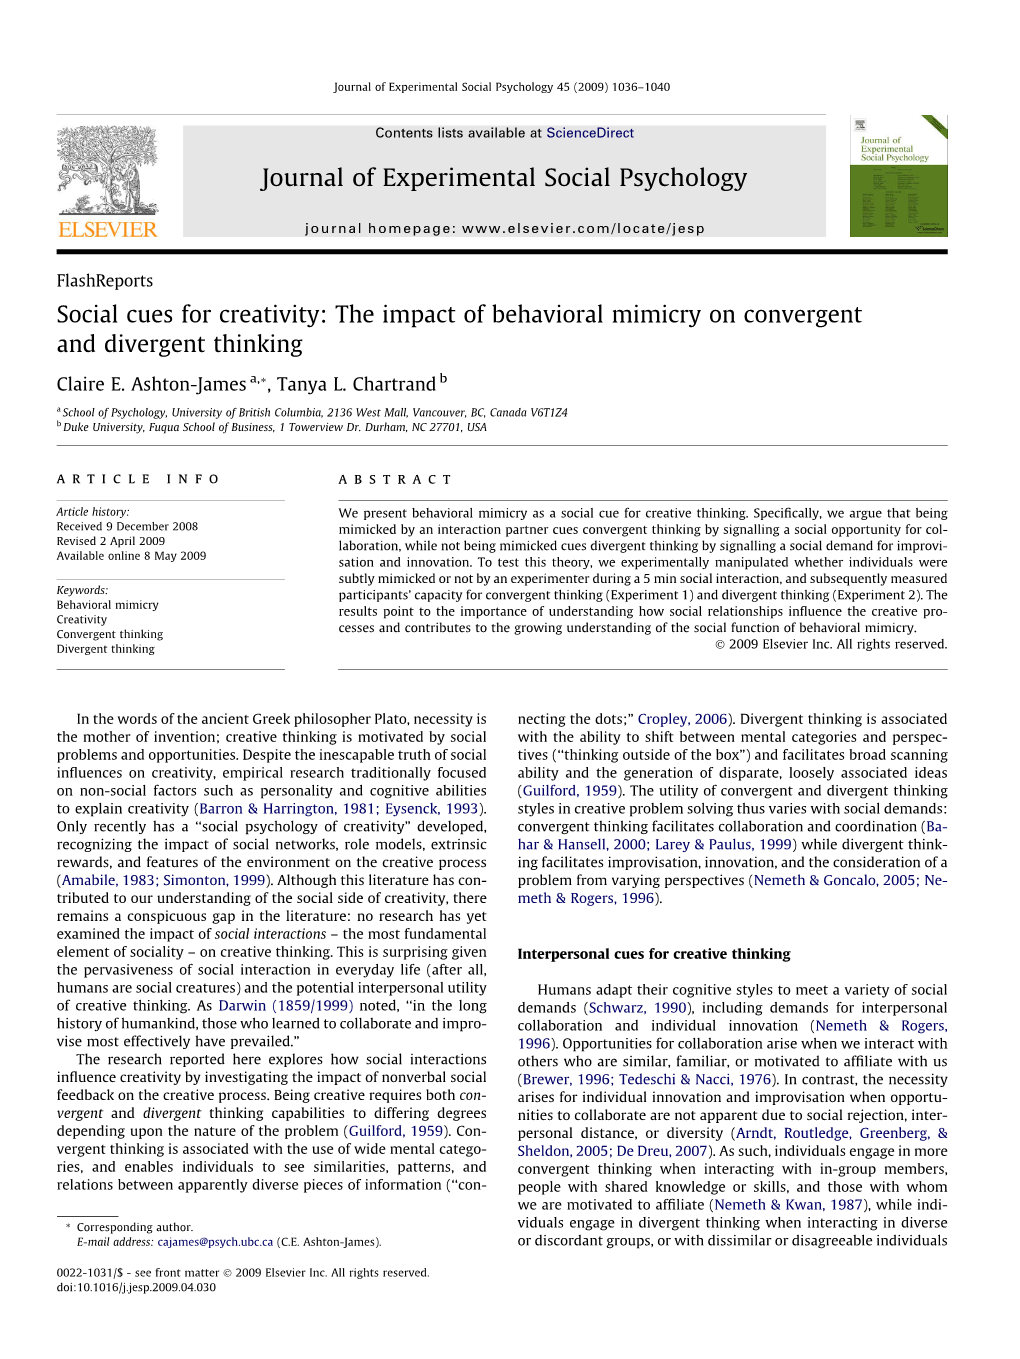 The Impact of Behavioral Mimicry on Convergent and Divergent Thinking